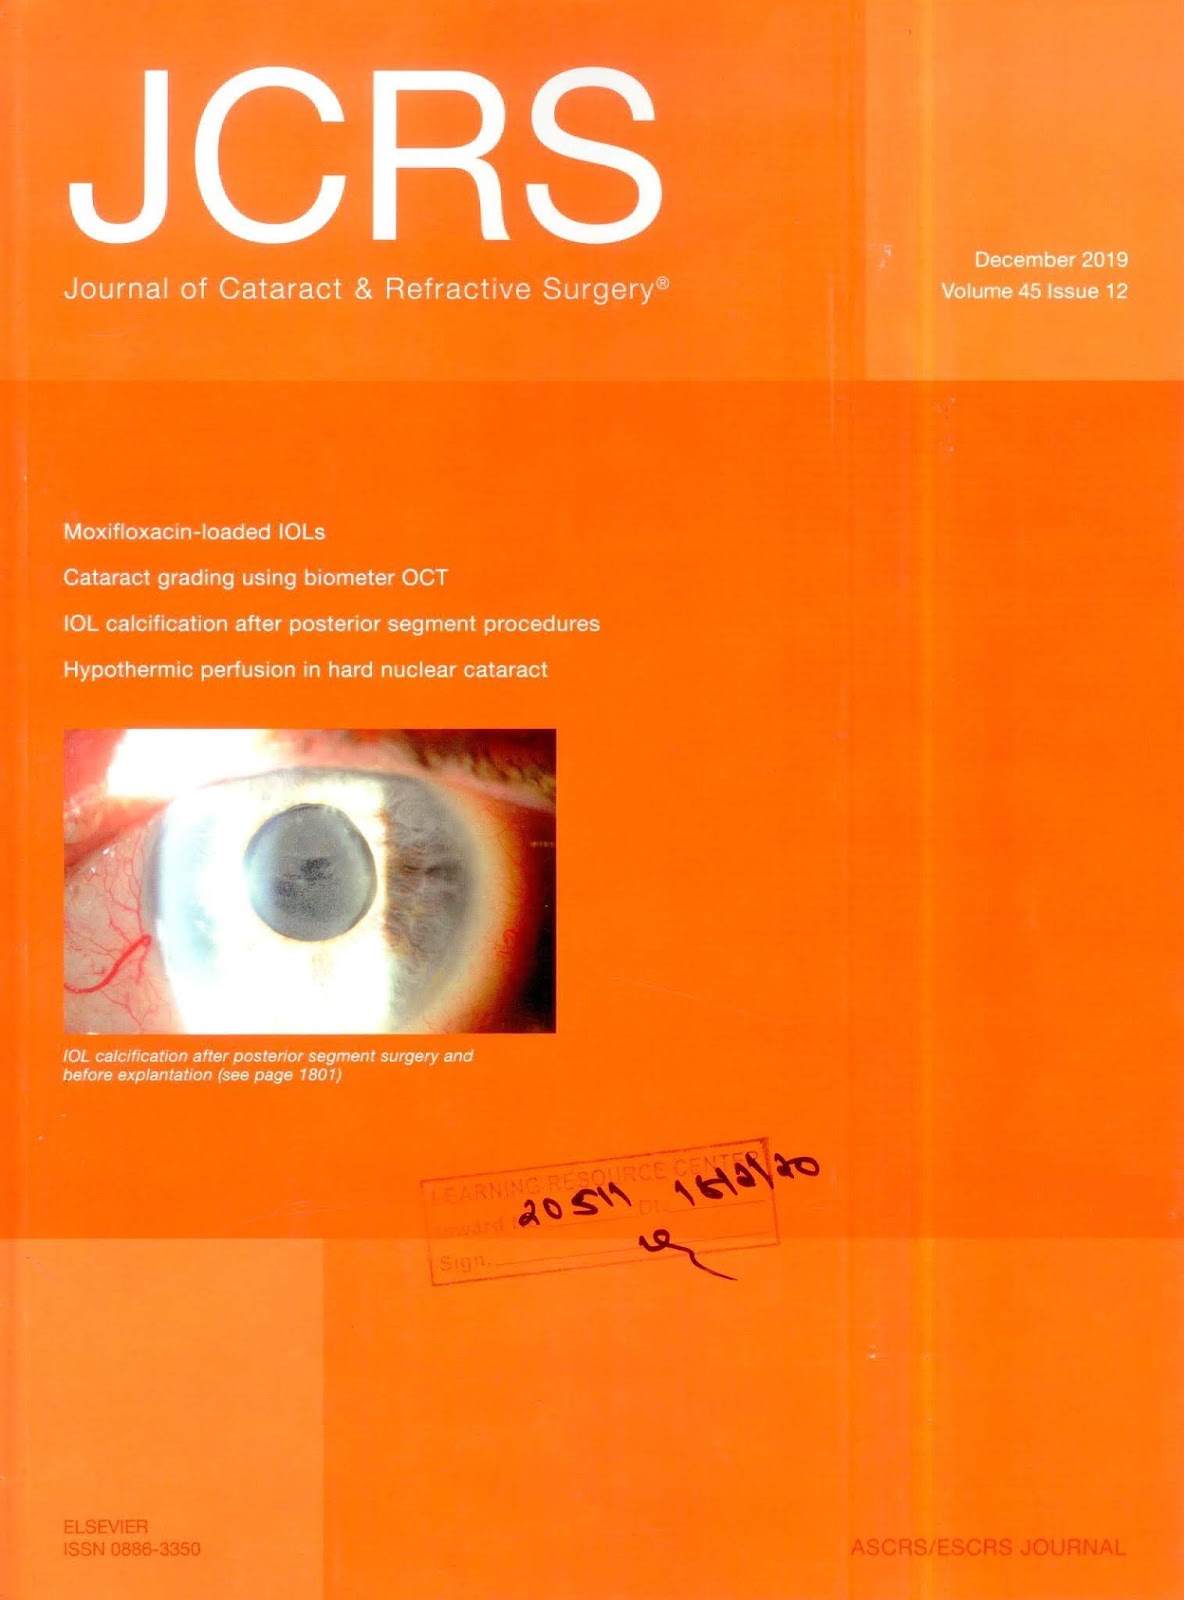 https://www.sciencedirect.com/journal/journal-of-cataract-and-refractive-surgery/vol/45/issue/12